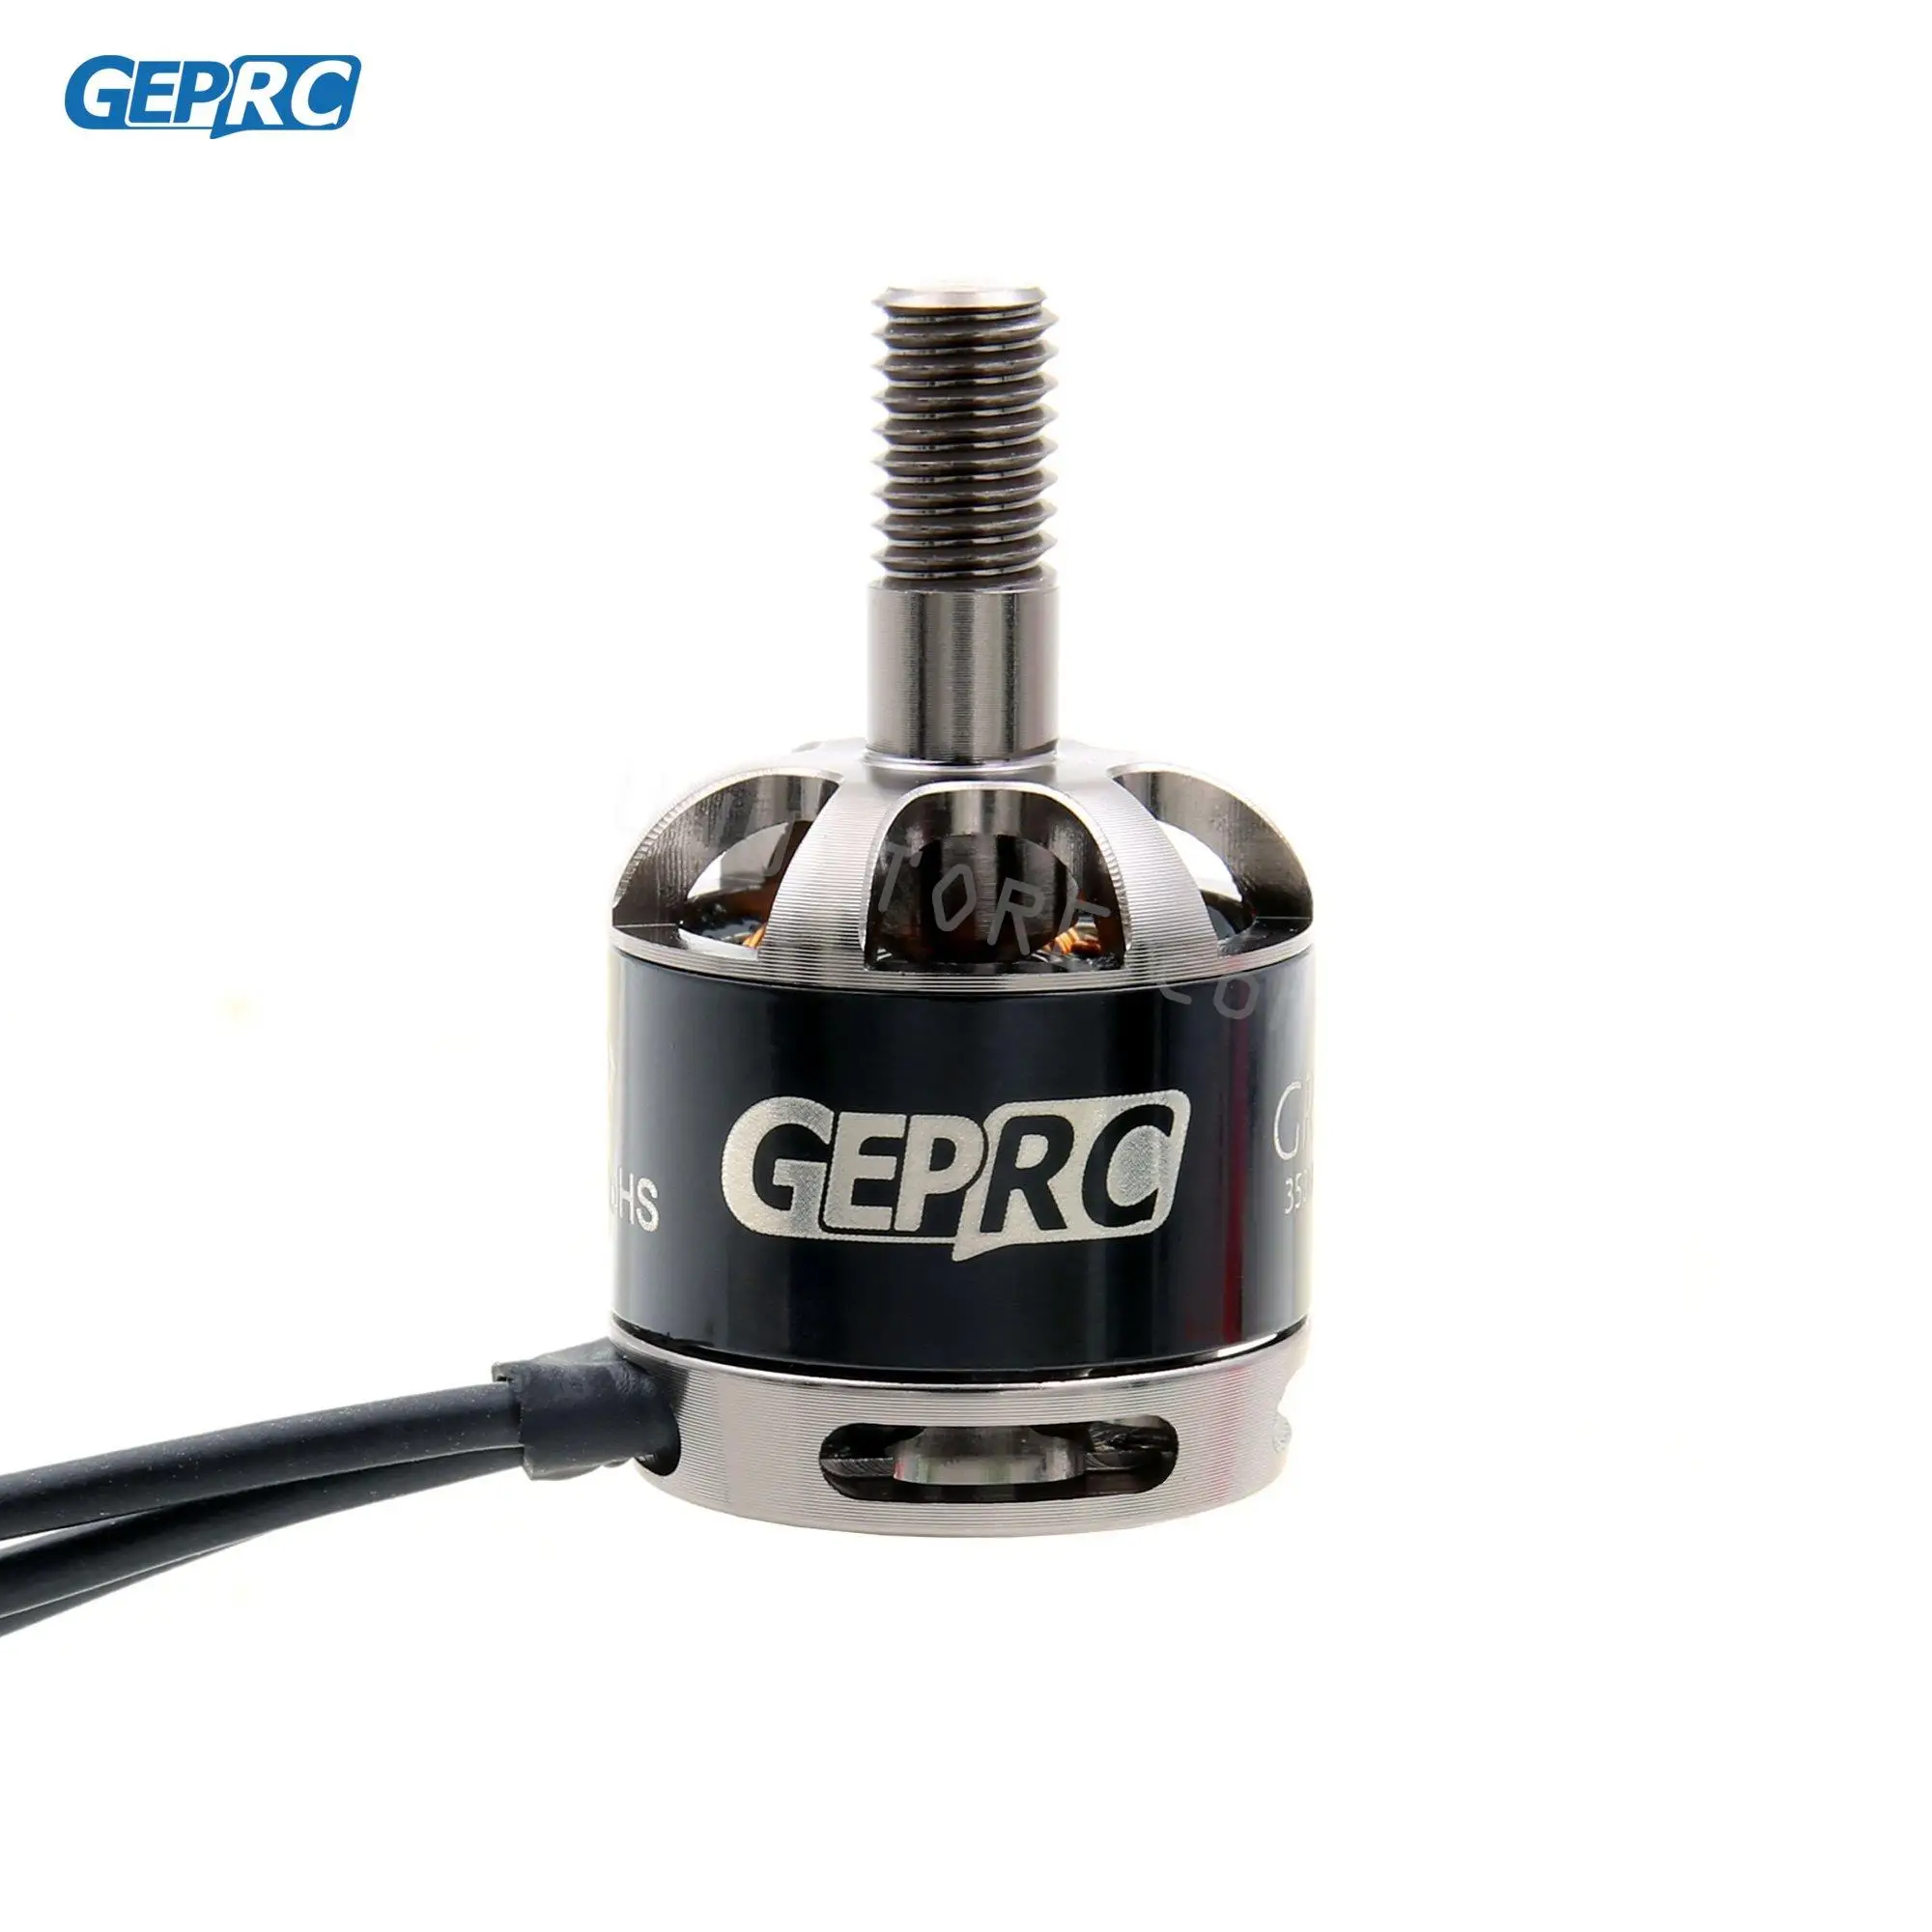 GEPRC GR1408 3500KV 2500KV 2-4S Brushless Motor for 3inch RC FPV Racing Freestyle Cinewhoop Ducted Drones DIY Parts 2